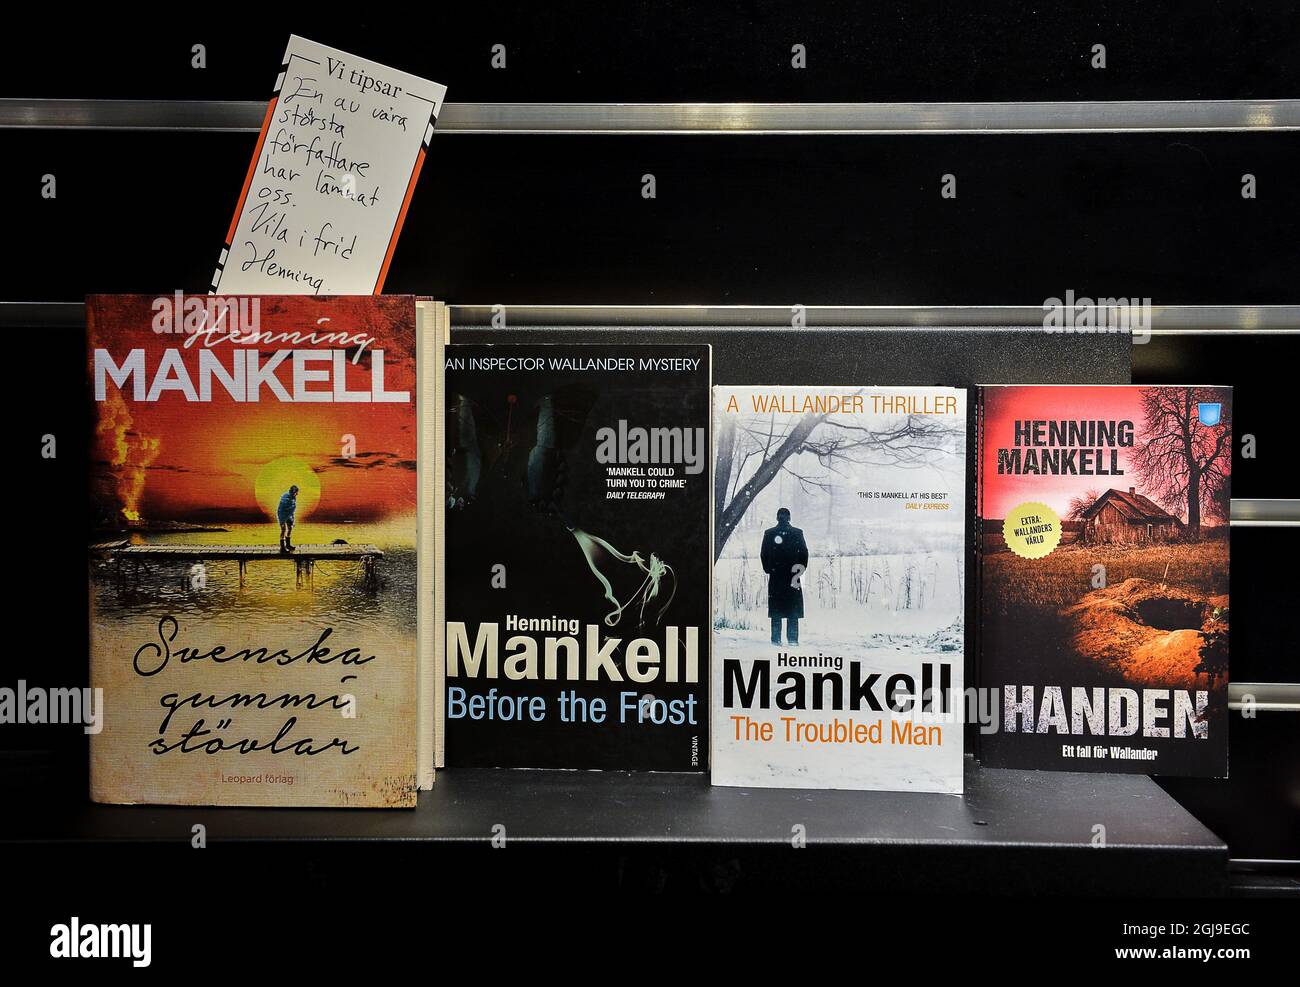 STOCKHOLM 2015-10-05 A note saying 'Rest in peace, one of our greatest writers' on a book of Henning Mankells on a shelf in a book store in Stockholm, Sweden, October 5, 2015. Henning Mankell died Monday. Henning Mankell was a Swedish crime writer, political activist and dramatist, best known for a series of crime novels starring his most famous creation, Inspector Kurt Wallander. Wallander has been filmed both with Swedish actor Krister Henriksson and British actor Kenneth Branagh in the leading roles. Mankell was 67. Foto Jonas Ekstromer / TT / kod 10030  Stock Photo